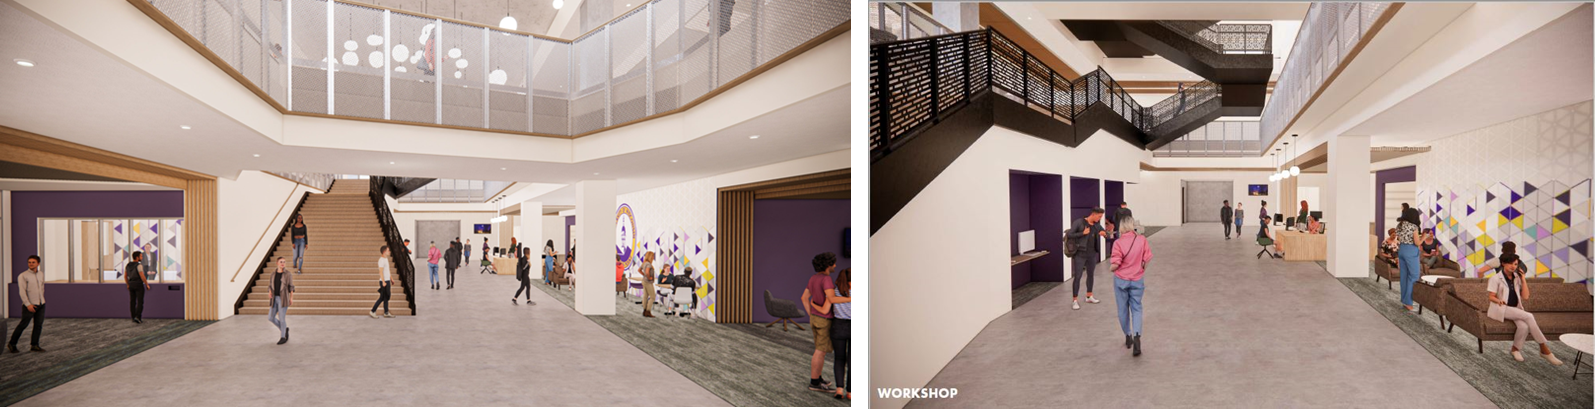 west entrance and main stairway plus circulation desk and main floor lounge area